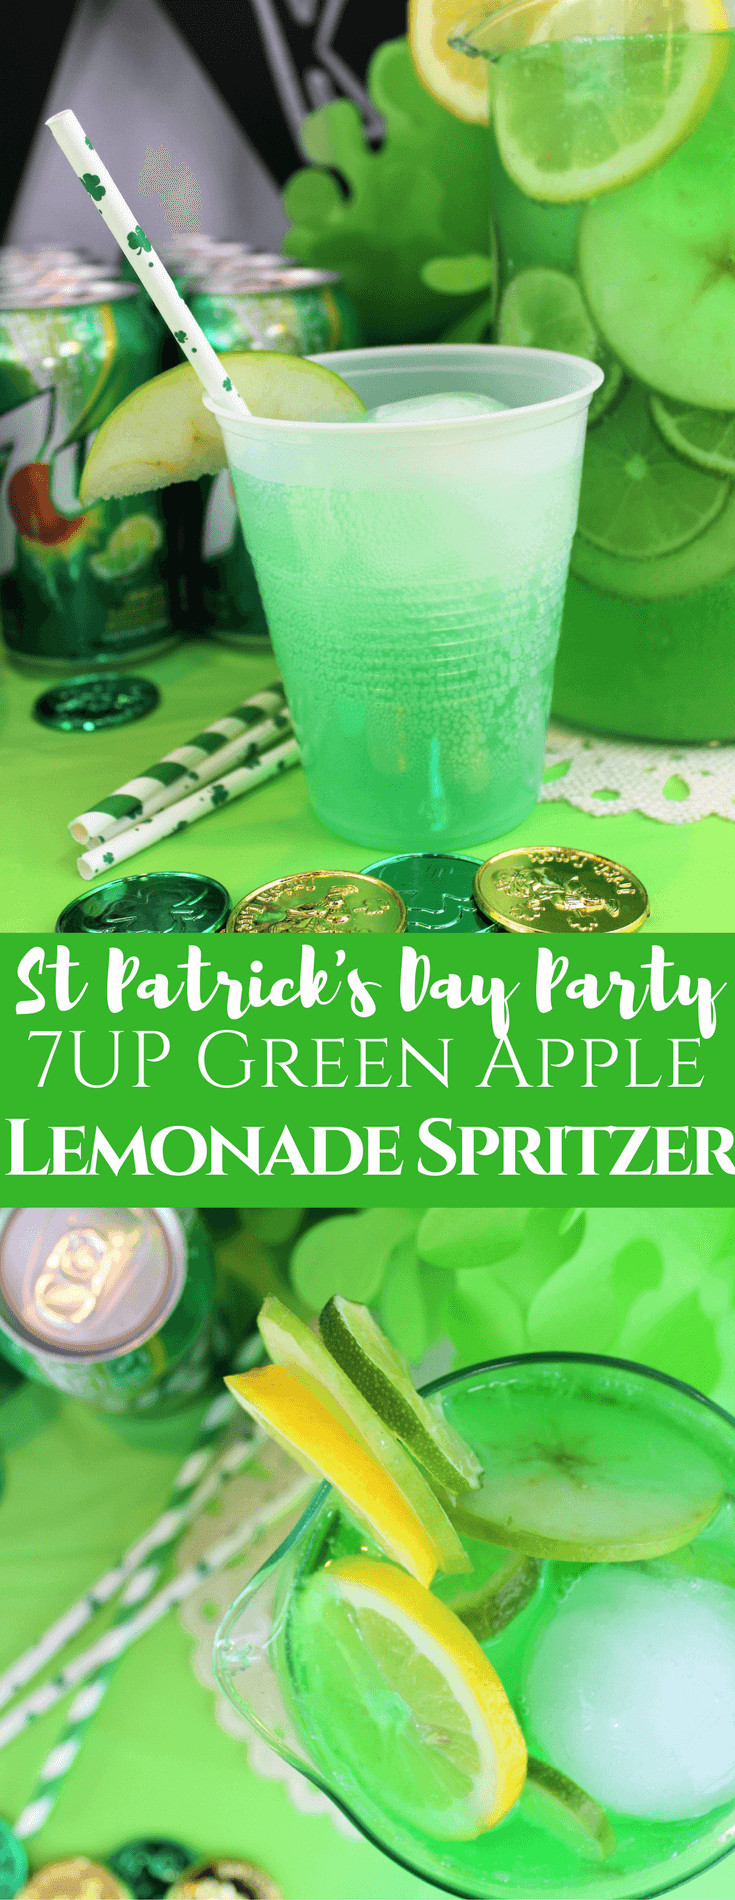 Food For St Patrick's Day Party
 St Patrick s Day Party Recipes